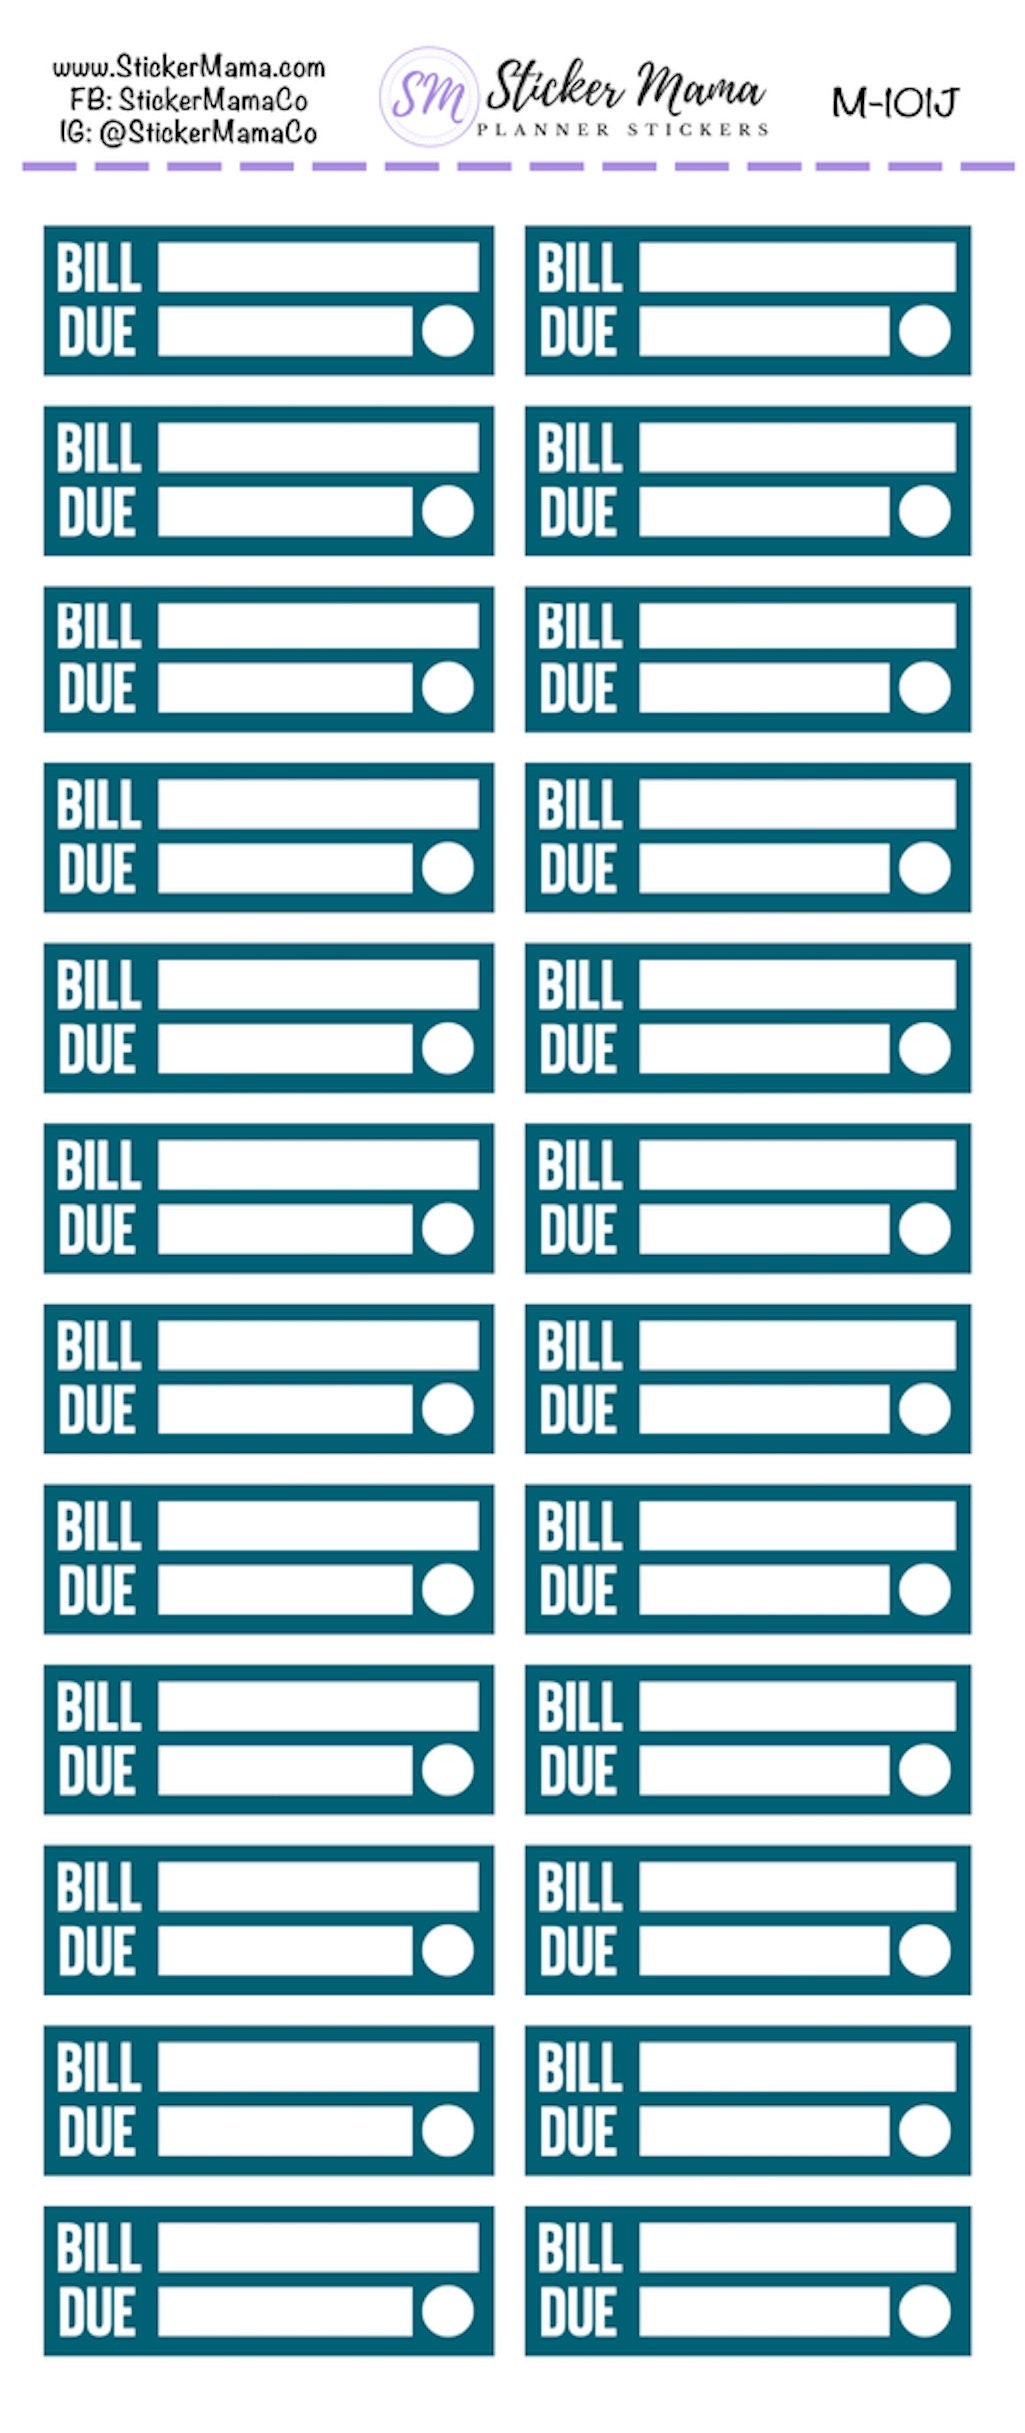 M-101 - BILL PAY STICKERS - Planner Stickers - Bill Pay for Planners